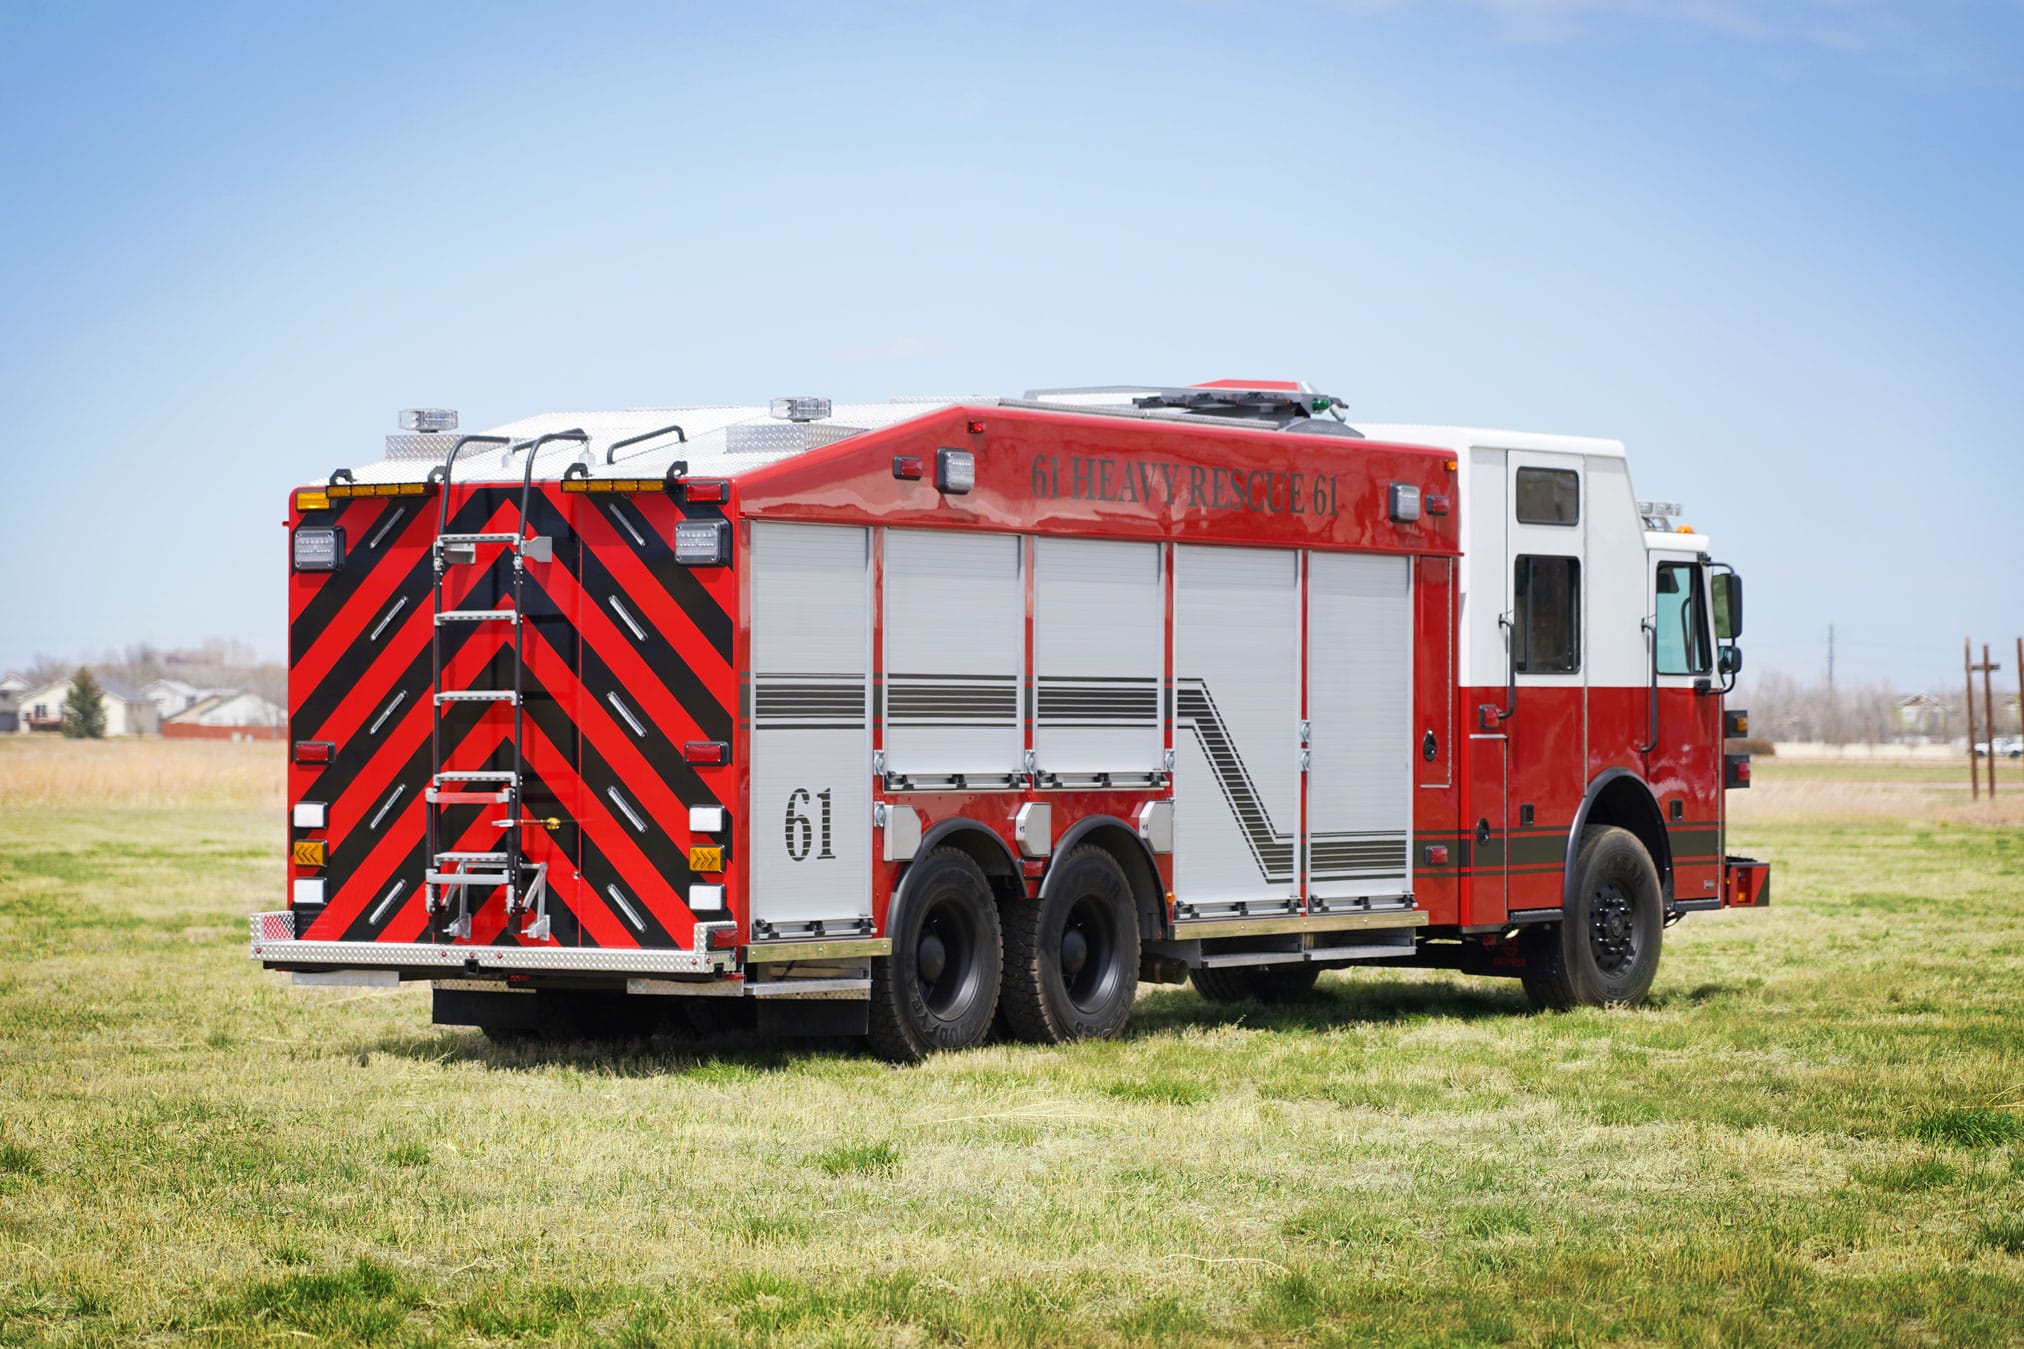 Featured image for “Loveland Symmes, OH Refurbished Heavy Rescue #1190R”